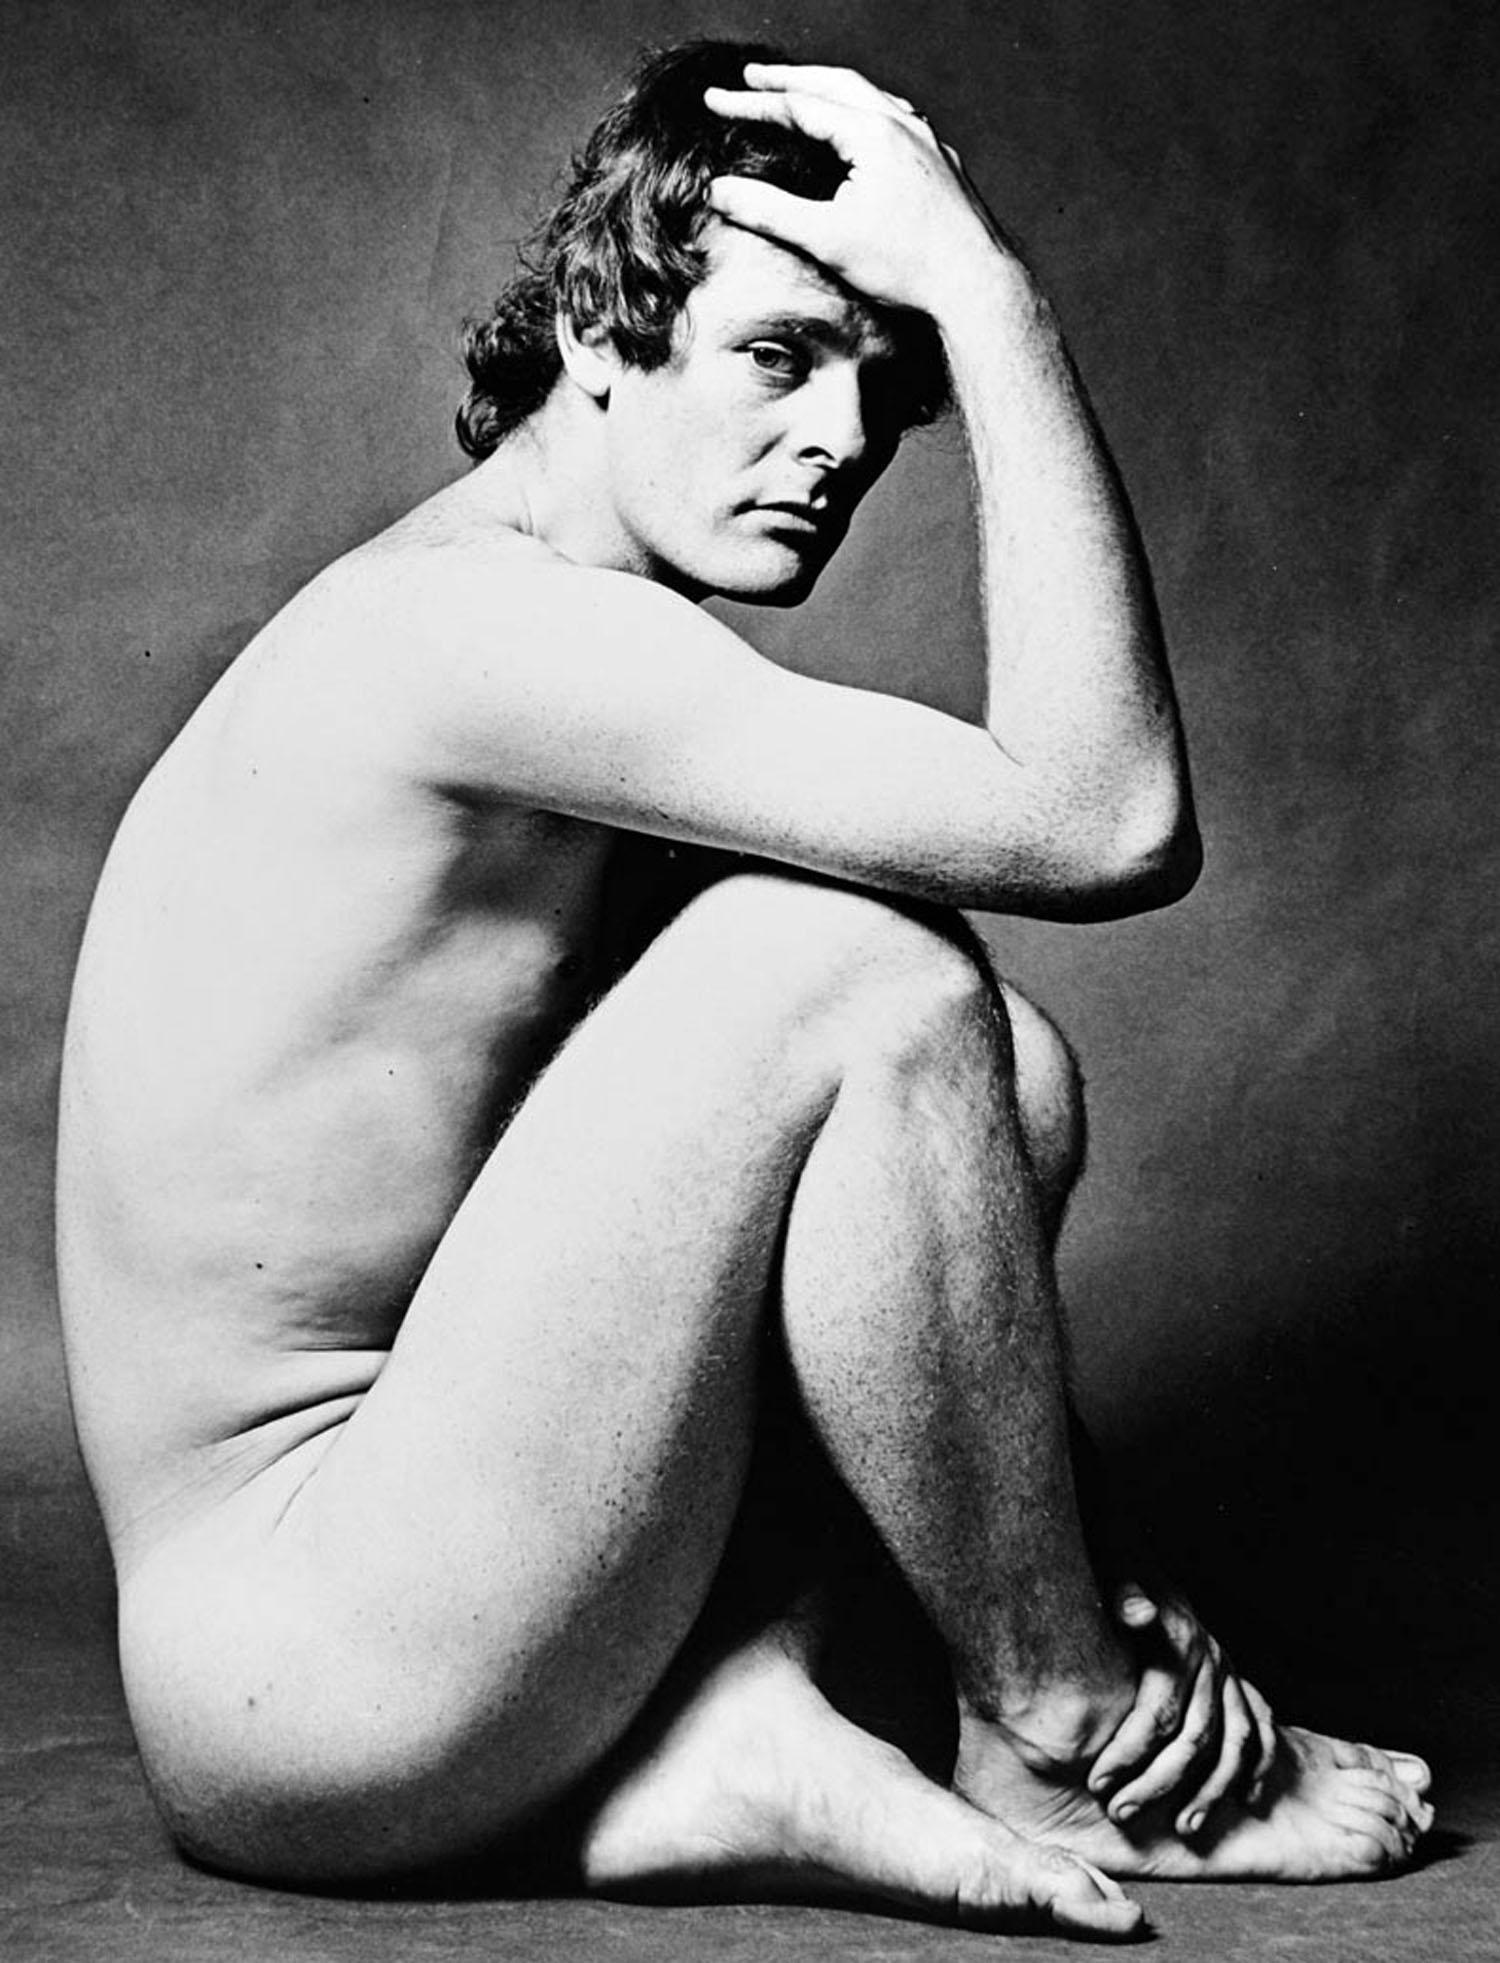  Andy Warhol Films director Paul Morrissey photographed nude for Vanity Fair - Photograph by Jack Mitchell